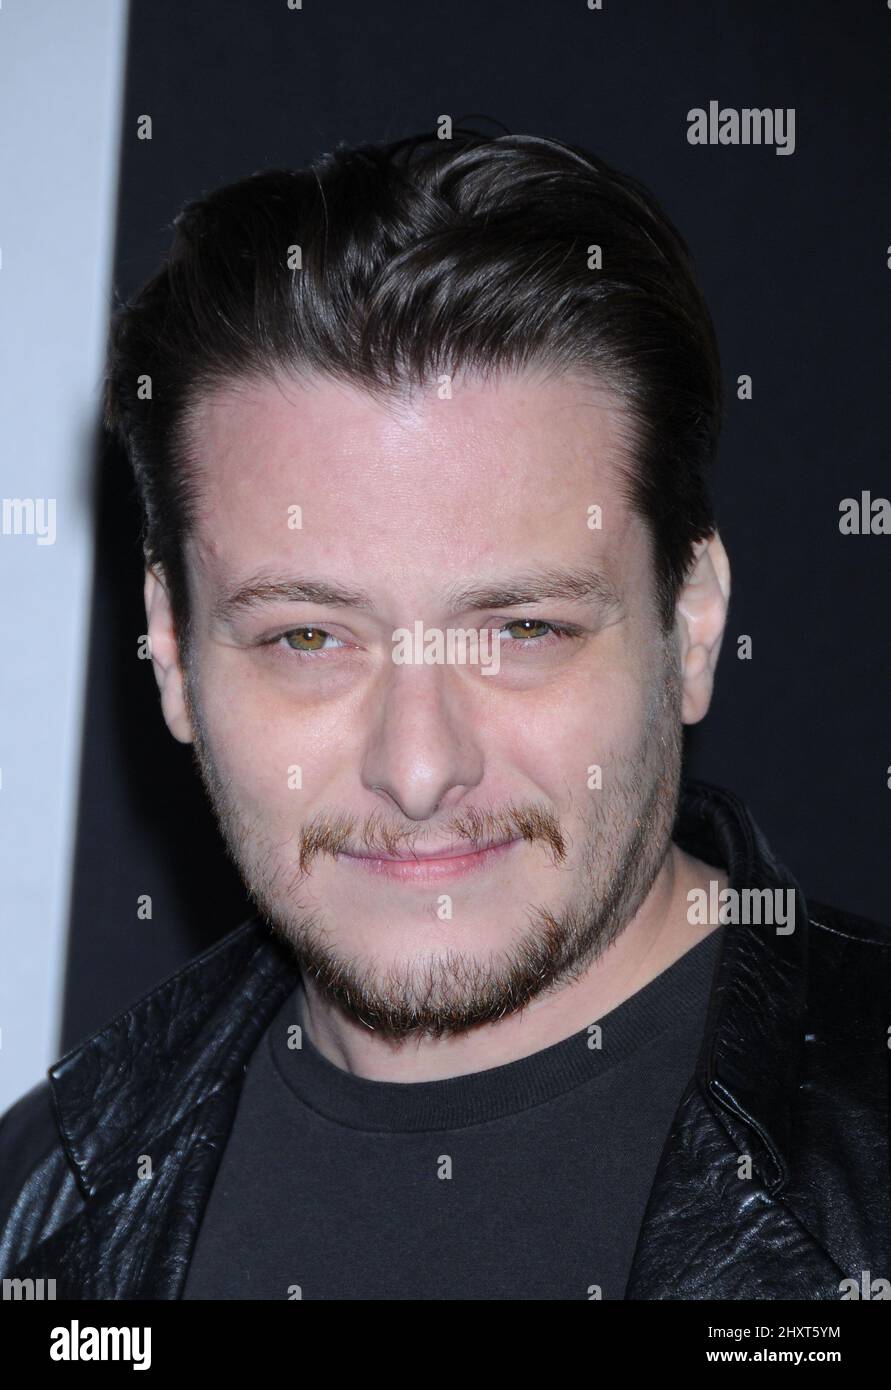 Edward Furlong at the 'Green Hornet' premiere held at Grauman's Chinese Theatre, Hollywood, California. Stock Photo